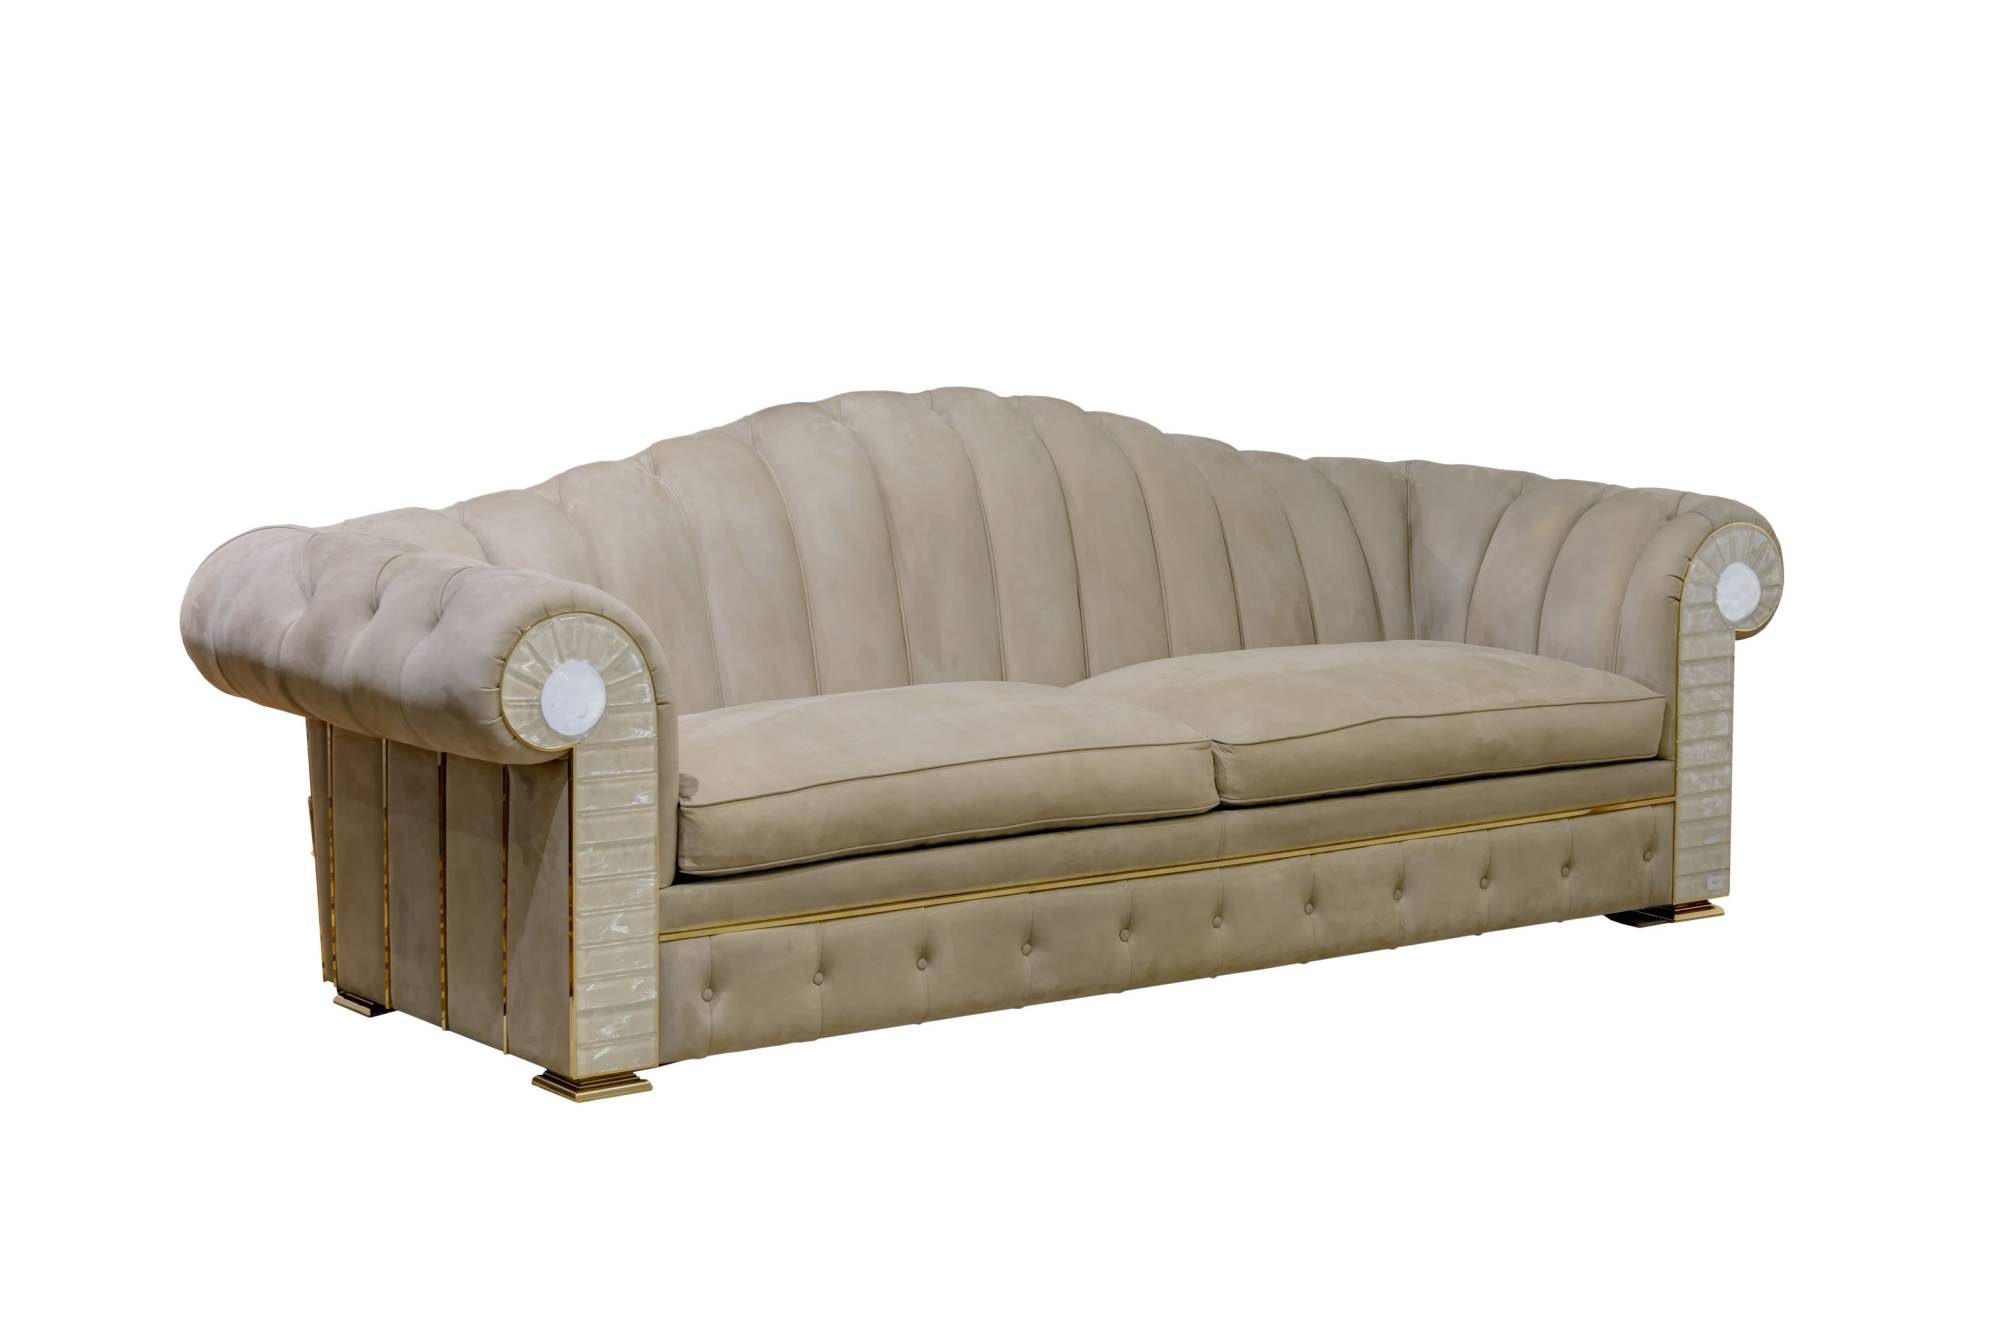 ART. 2075 – C.G. Capelletti Italian Luxury Classic Sofas. Transform your space with sophisticated made in italy classic interior design.